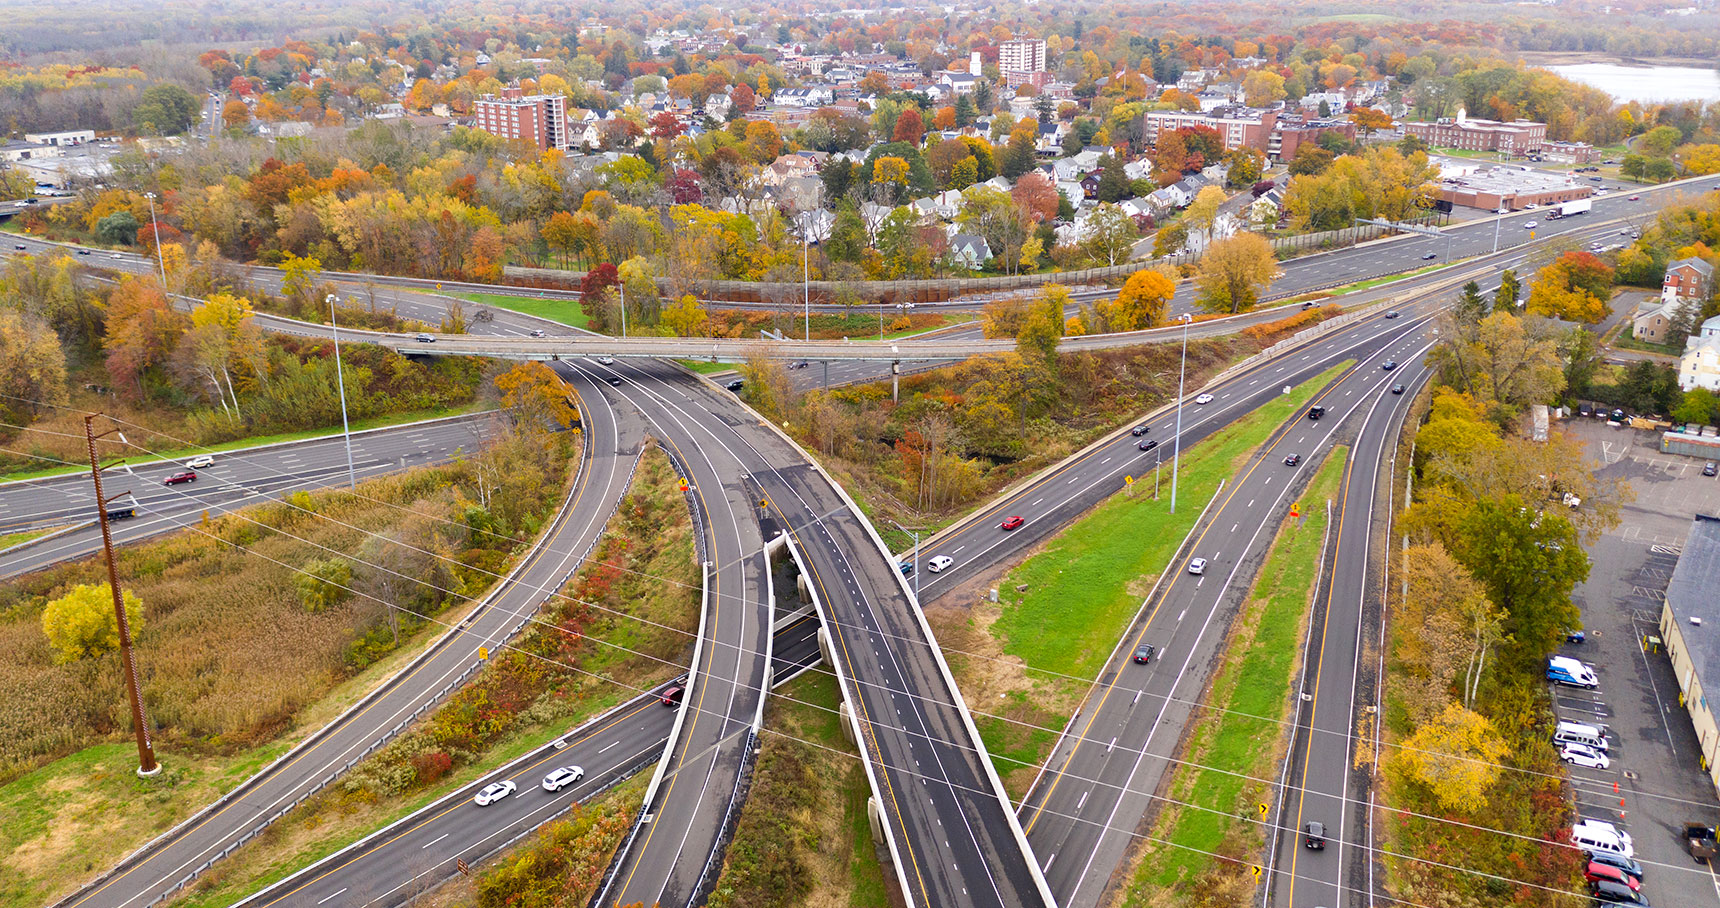 Aerial view of highways that intersect